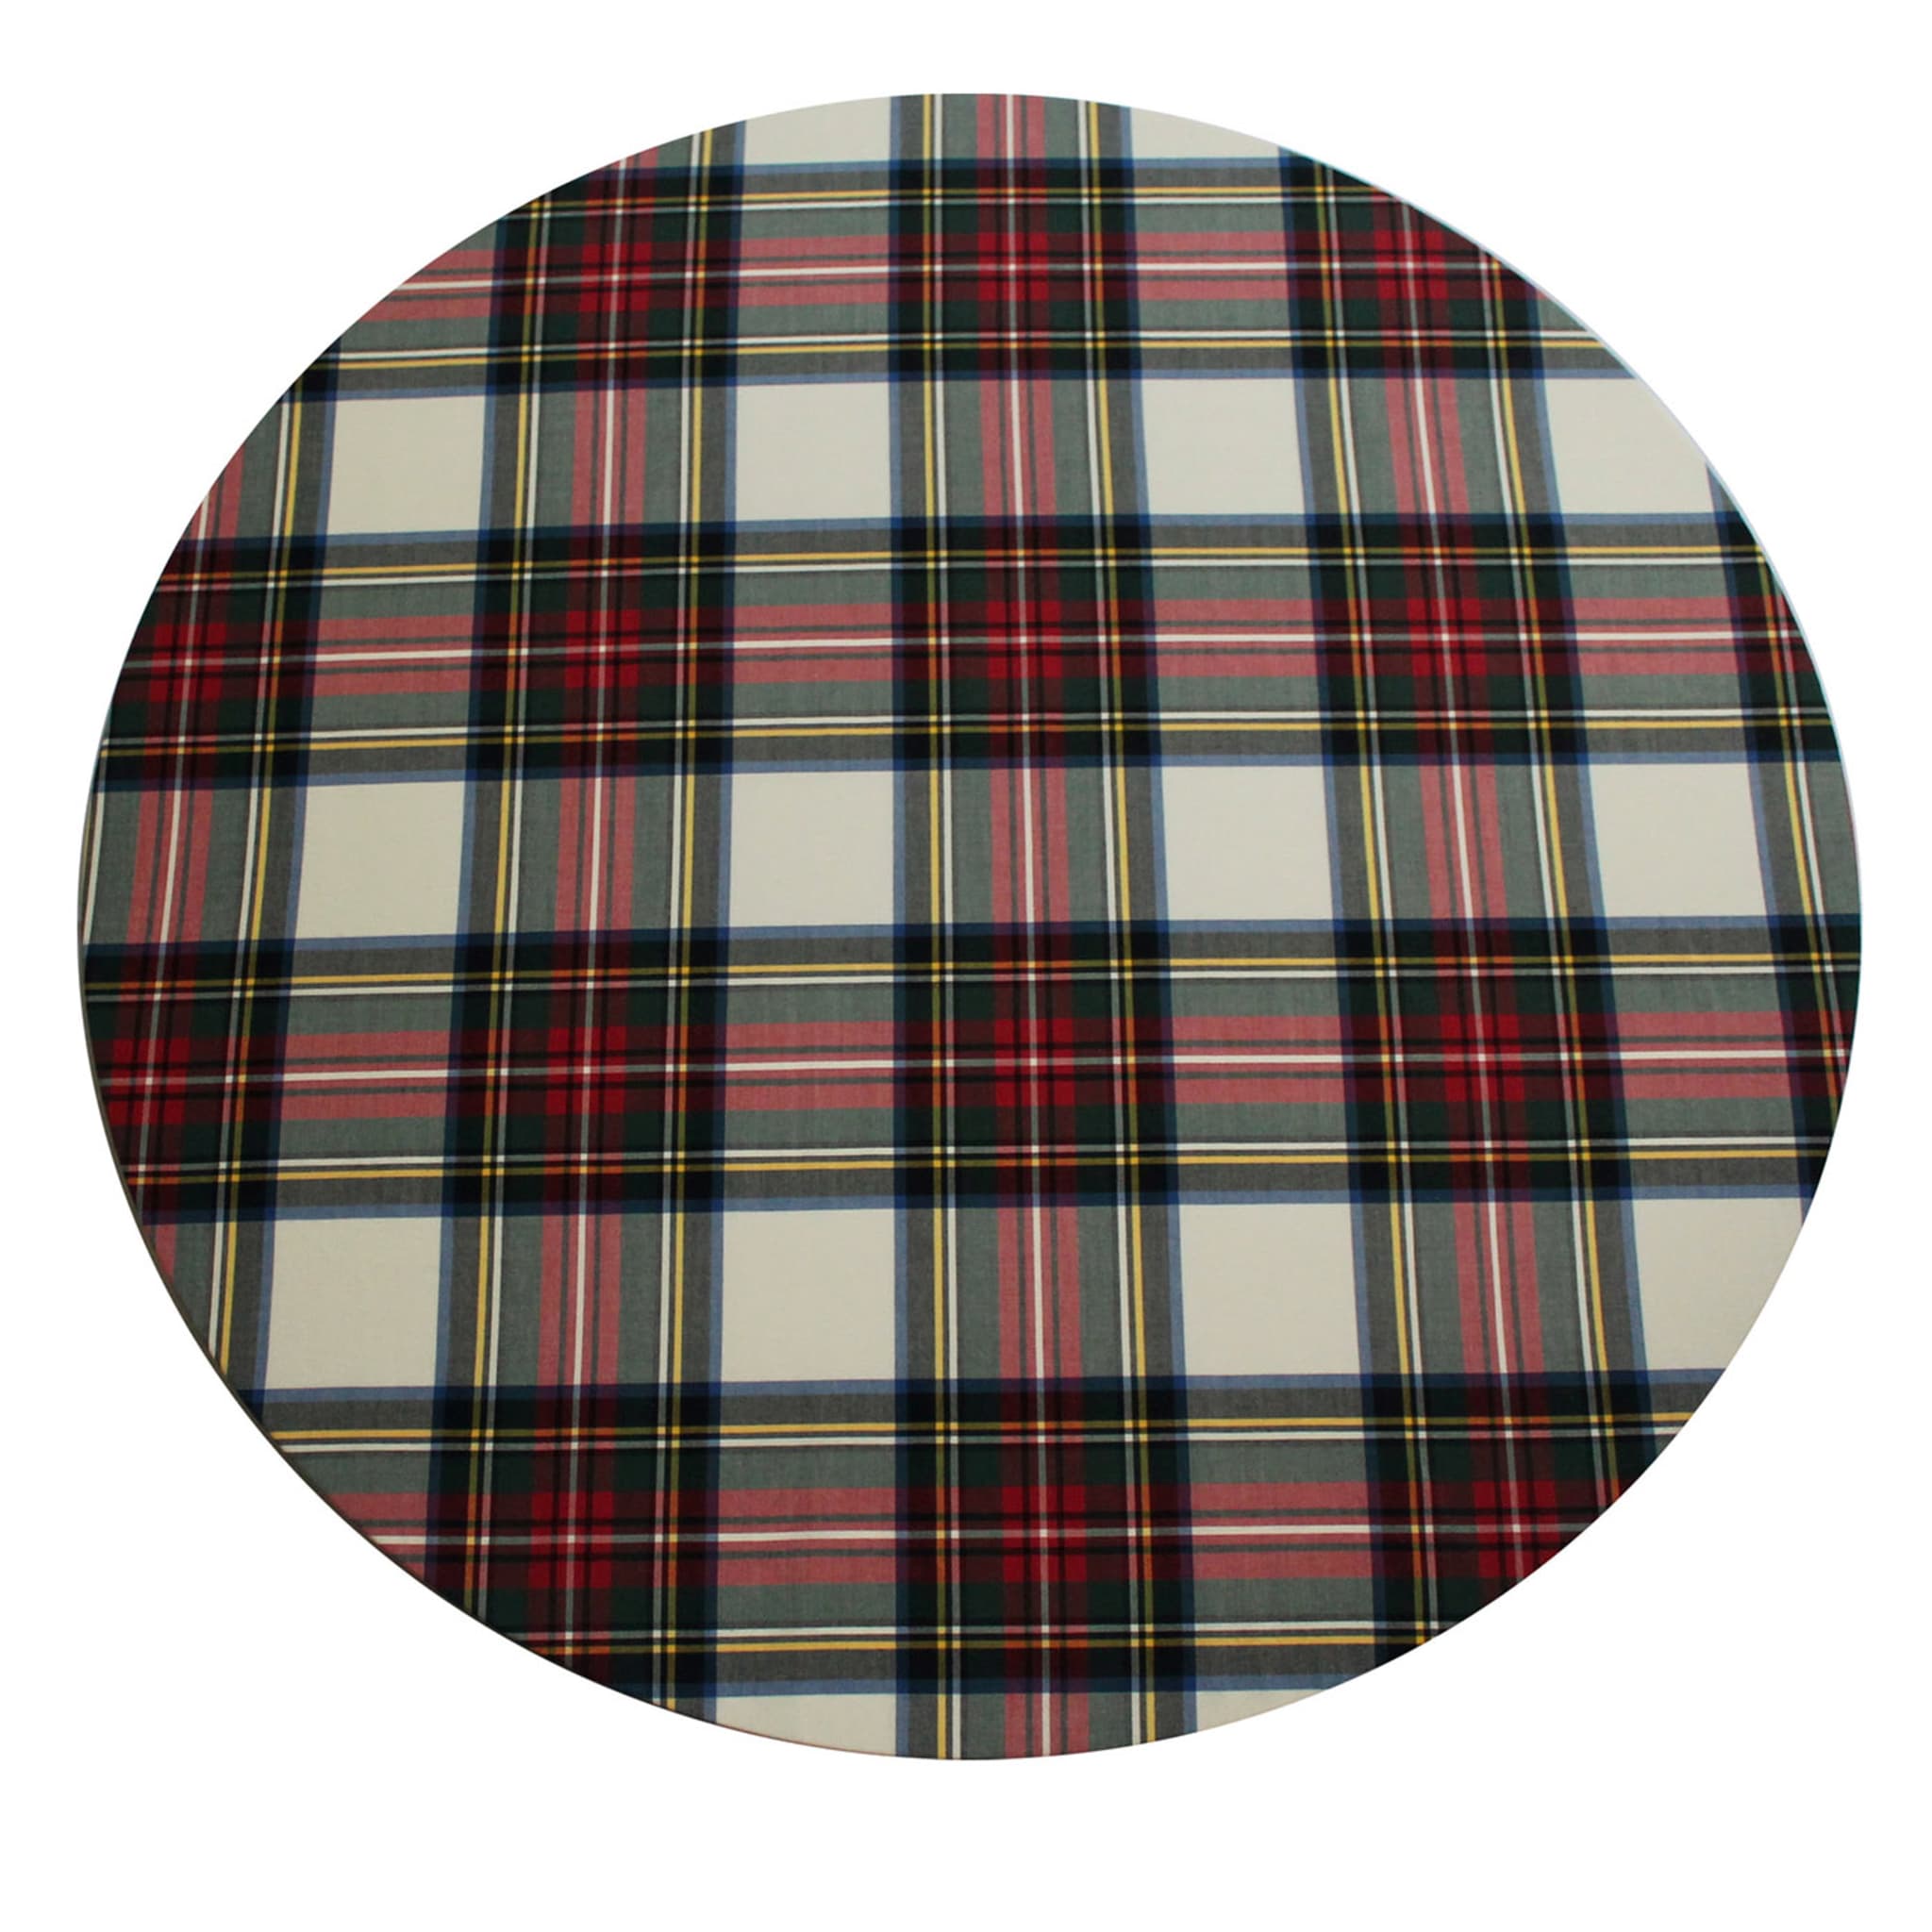 Set of 2 Cuffiette Extra-Small Round Tartan Placemats - Main view